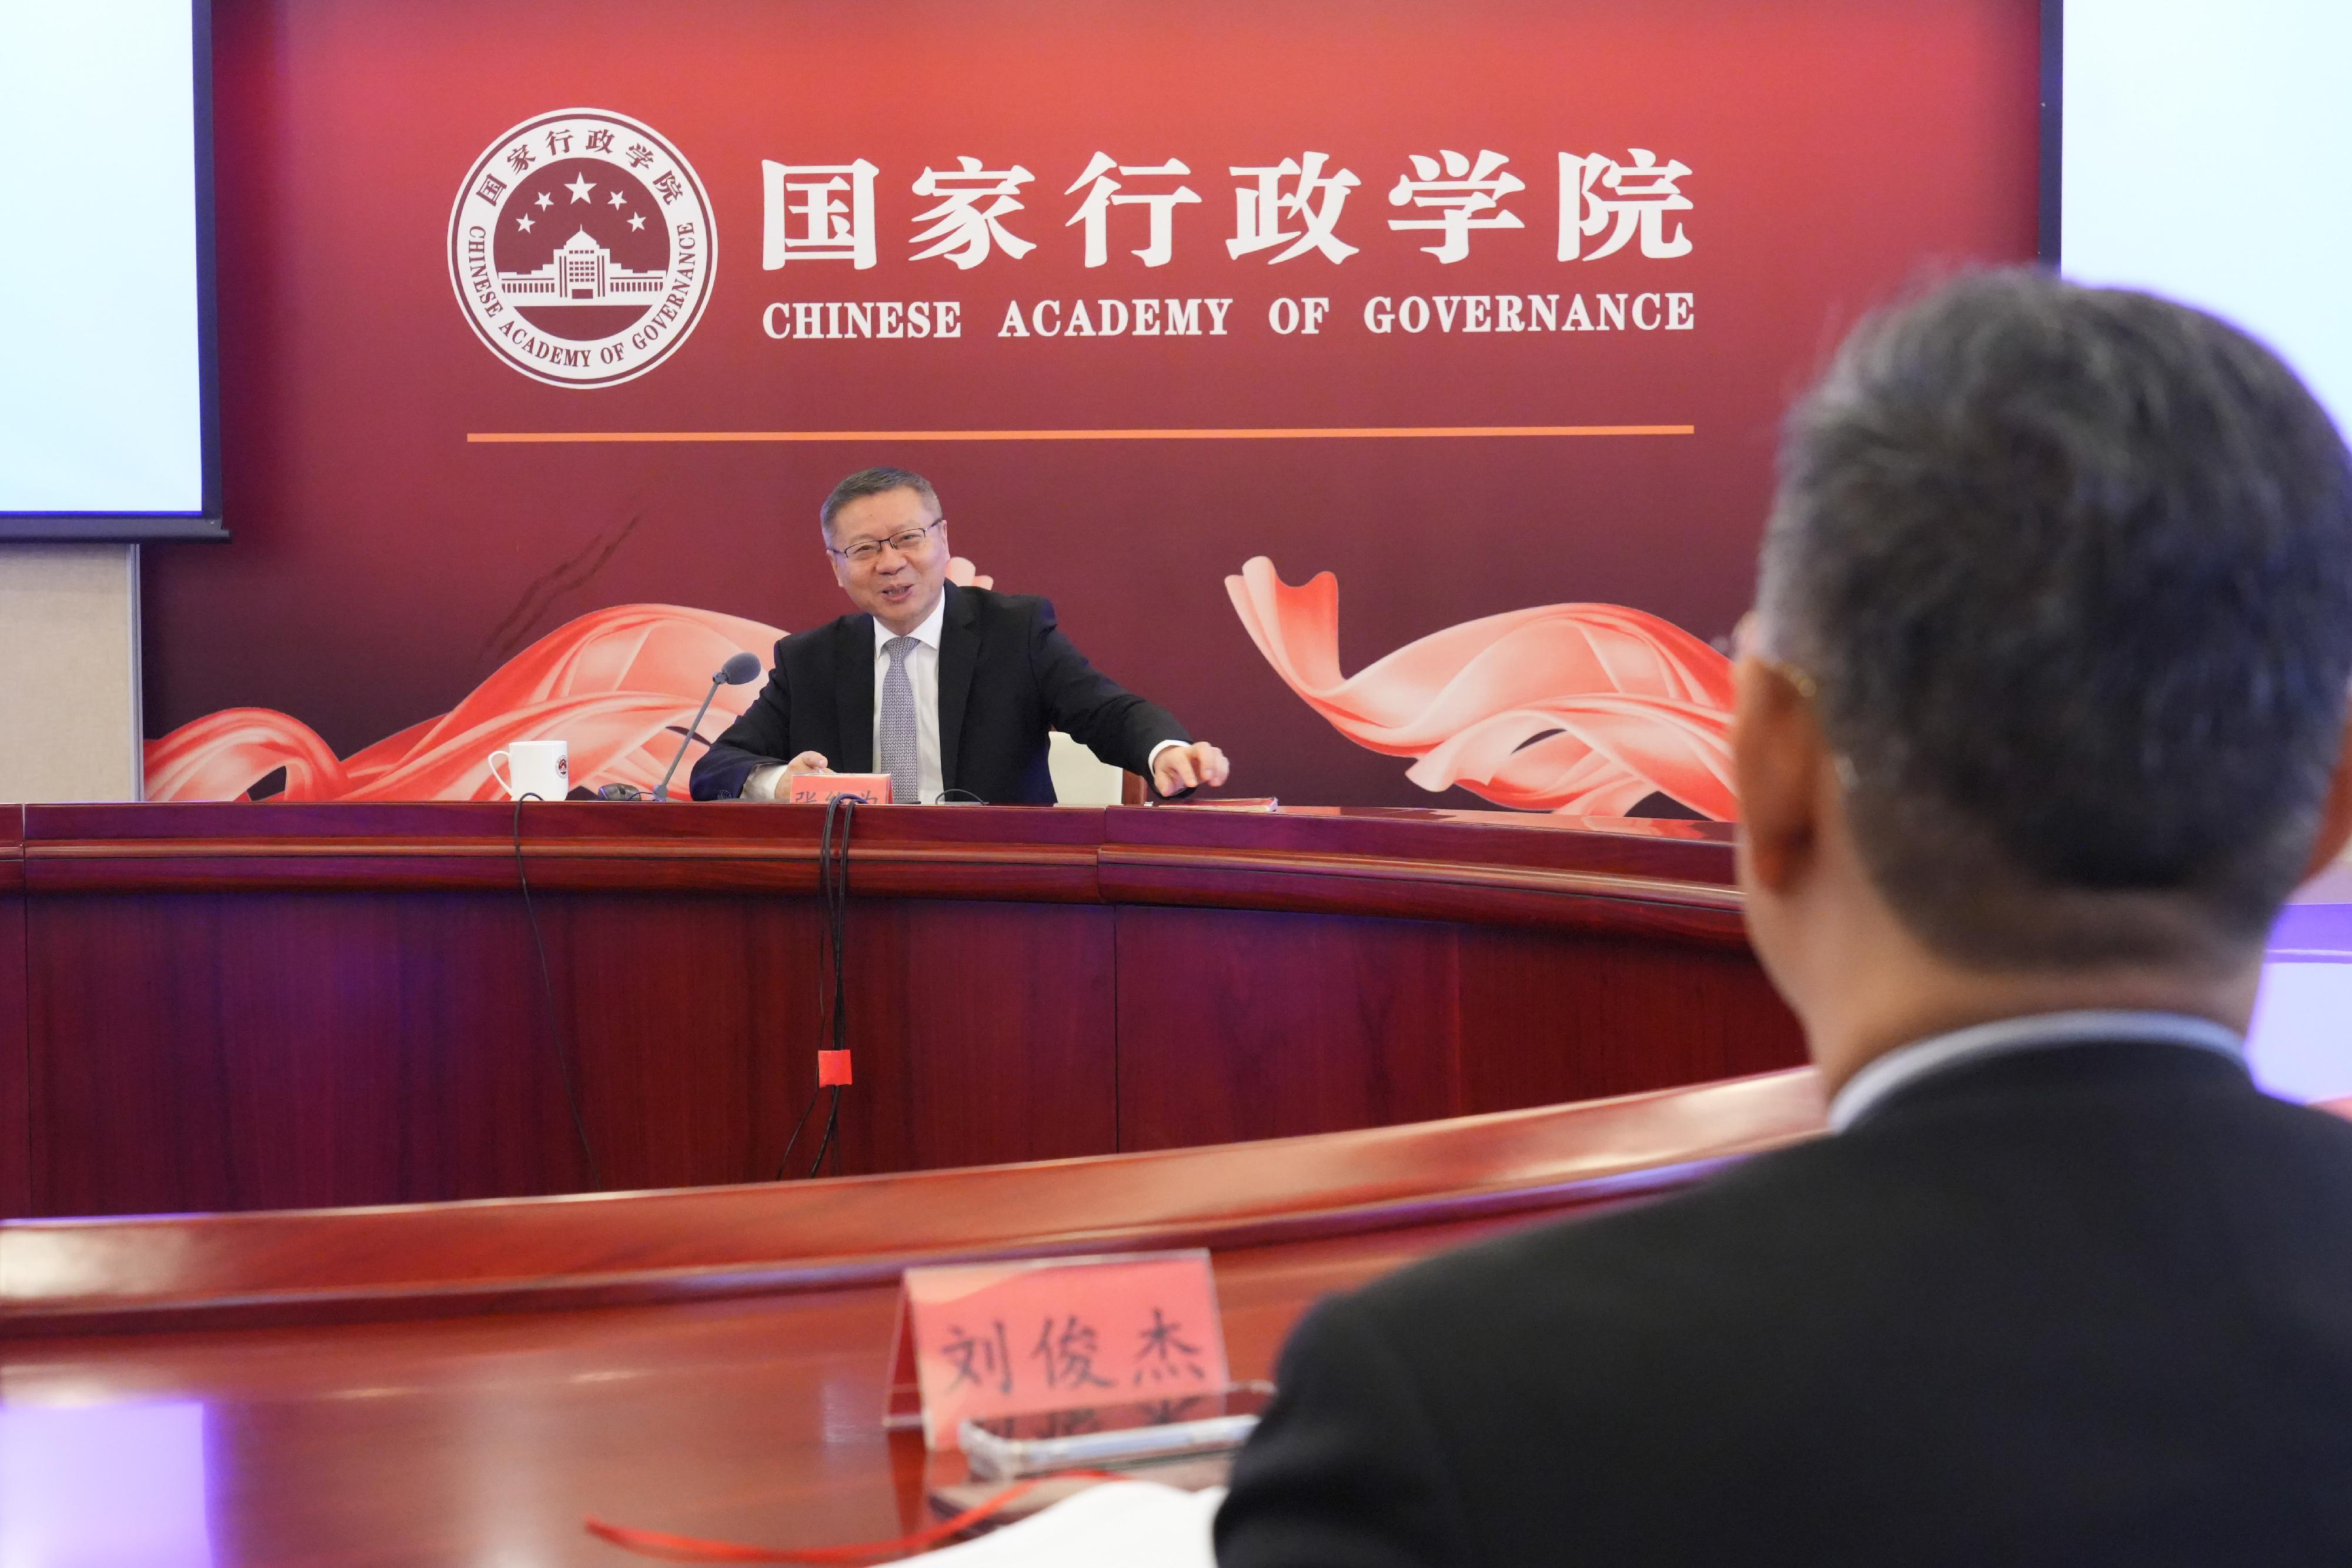 The Director of the China Institute of Fudan University, Professor Zhang Weiwei, gave a lecture on China's democratic politics to the delegation of Permanent Secretaries and Heads of Departments of the Hong Kong Special Administrative Region Government on a study and duty visit at the National Academy of Governance today (June 27).